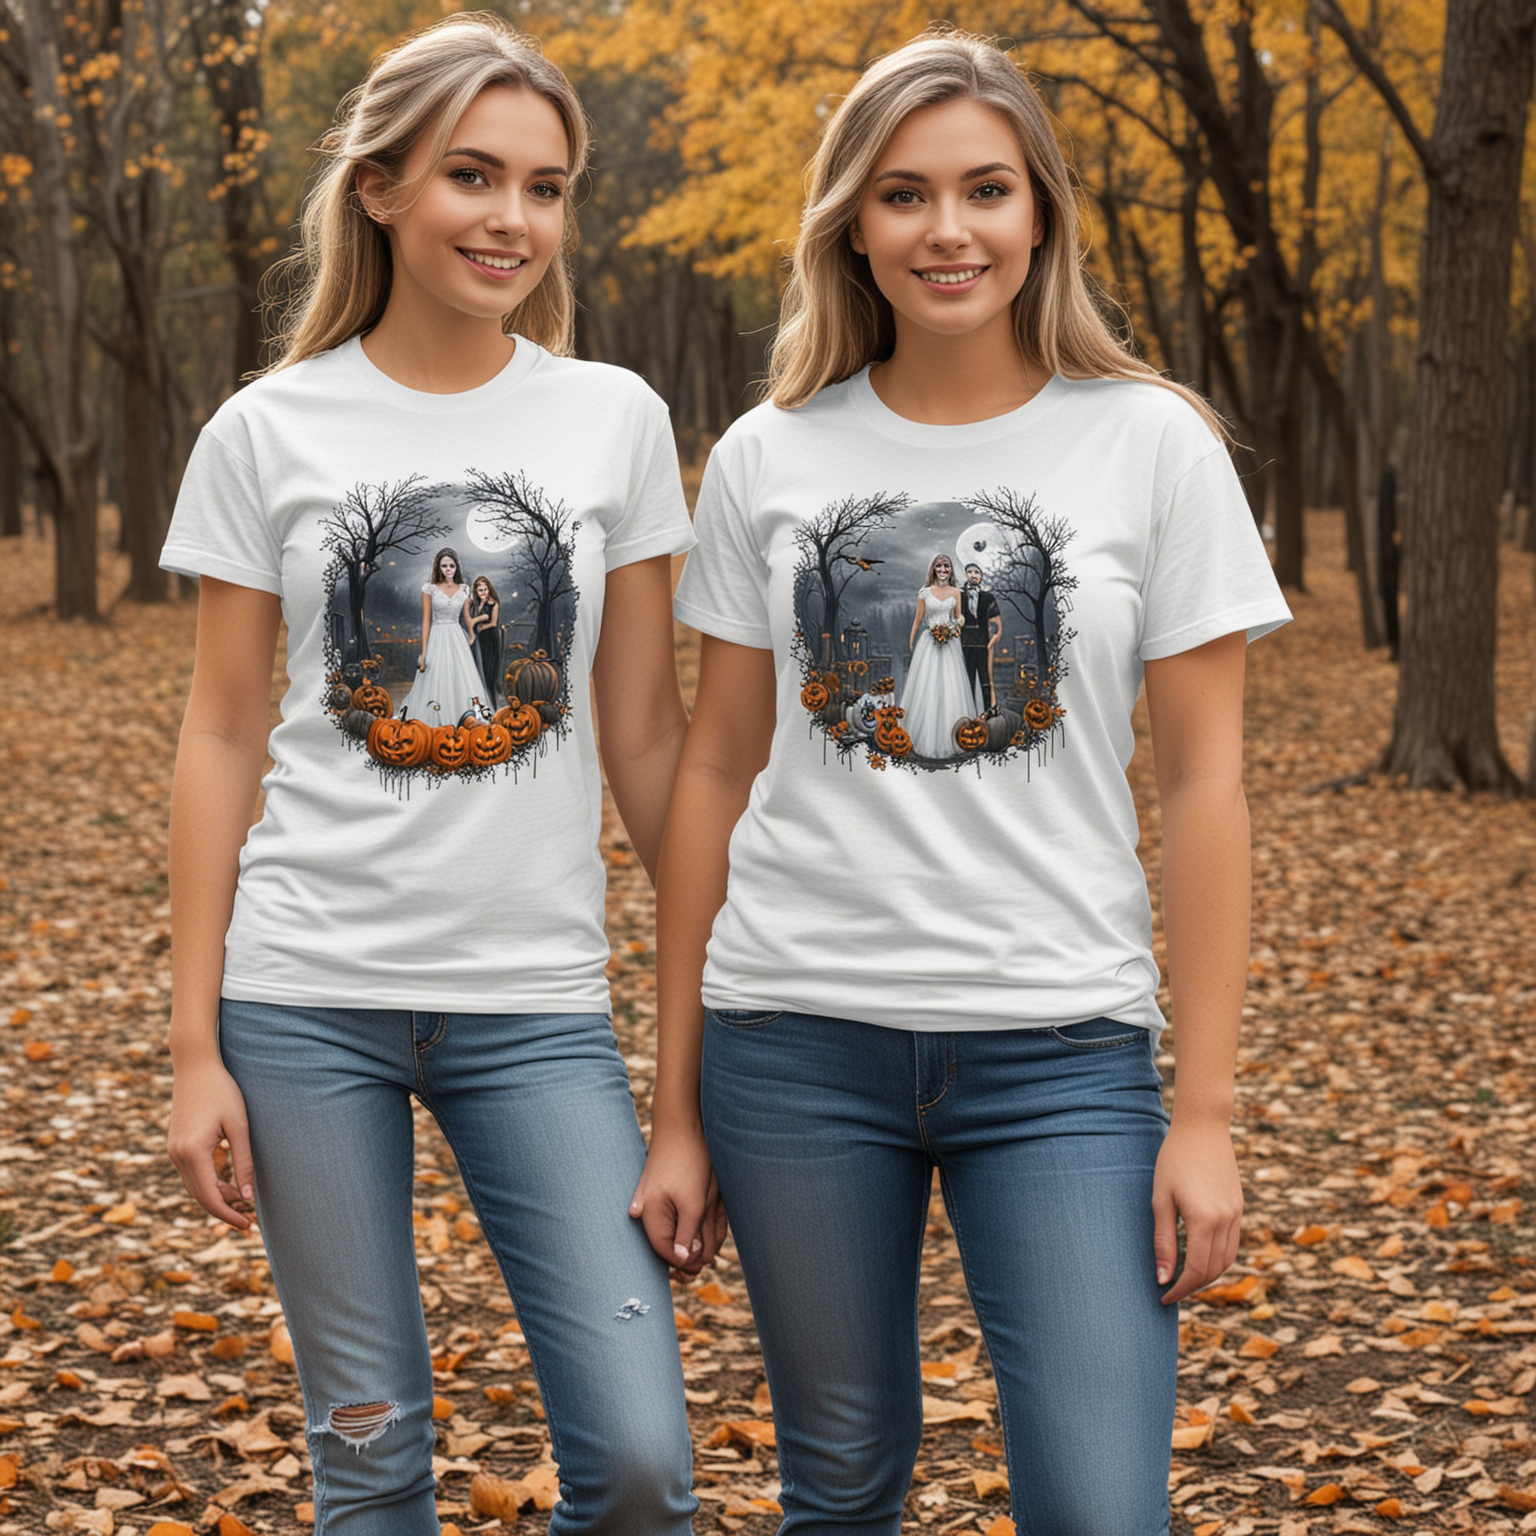 mock up for a white tee.  there should be 2 models.  both models should be adult females.  they should be adult mother and adult daughter. one model should look much older than the other.  the background should be an outdoor Halloween themed wedding scene.